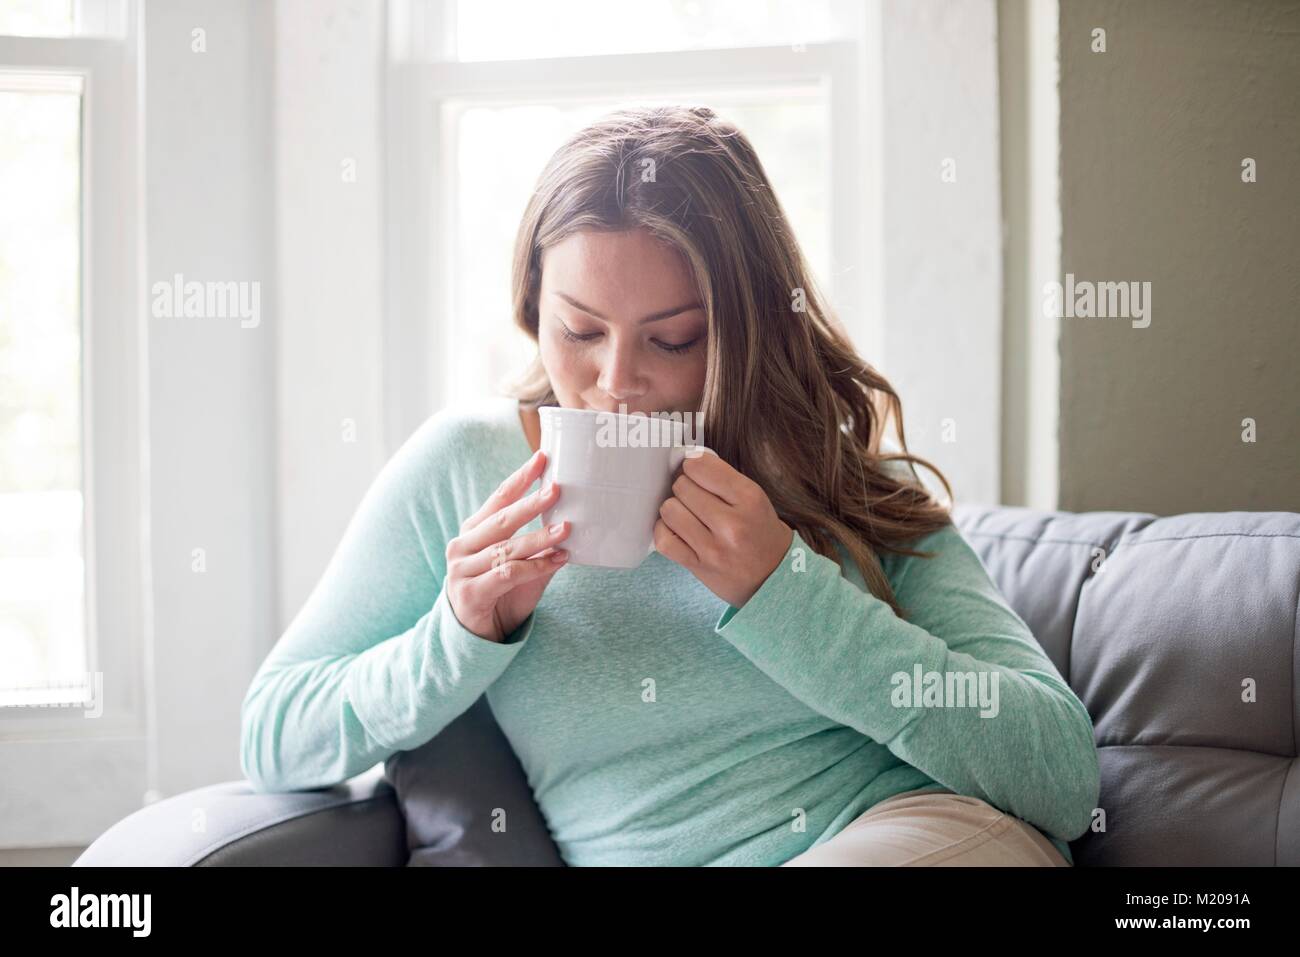 Young woman drinking hot drink from a mug. Stock Photo